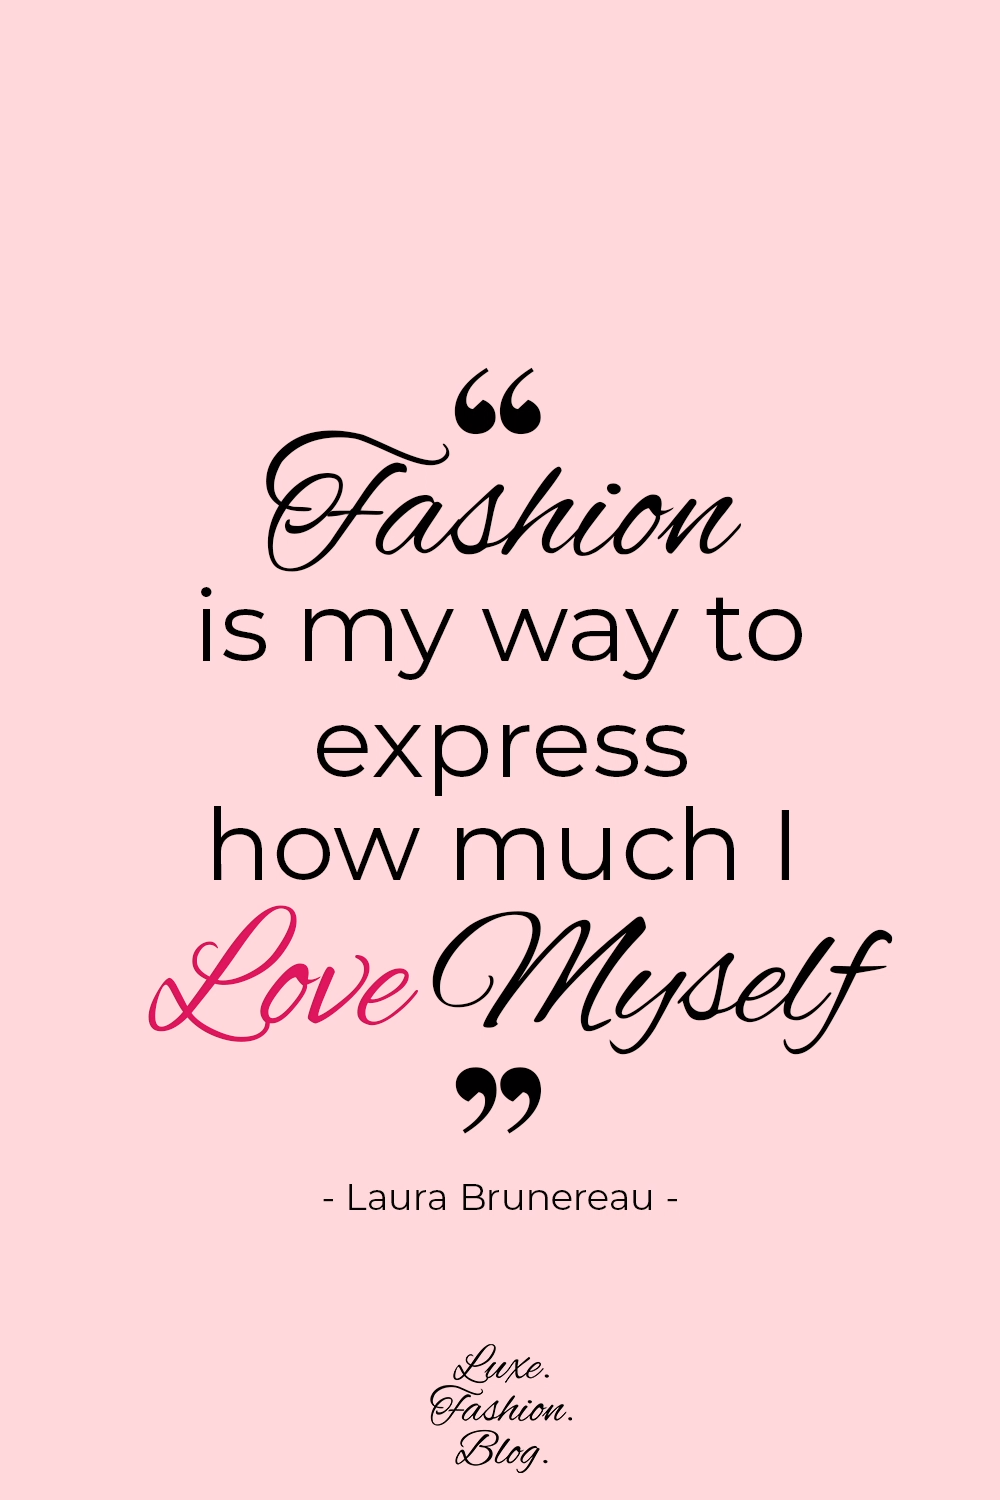 Love for Fashion Quotes - St. Valentine's Day | Quotes Self Love | LuxeFashionBlog.com - Love for Fashion Quotes - St. Valentine's Day | Quotes Self Love | LuxeFashionBlog.com -   beauty Inspiration frases